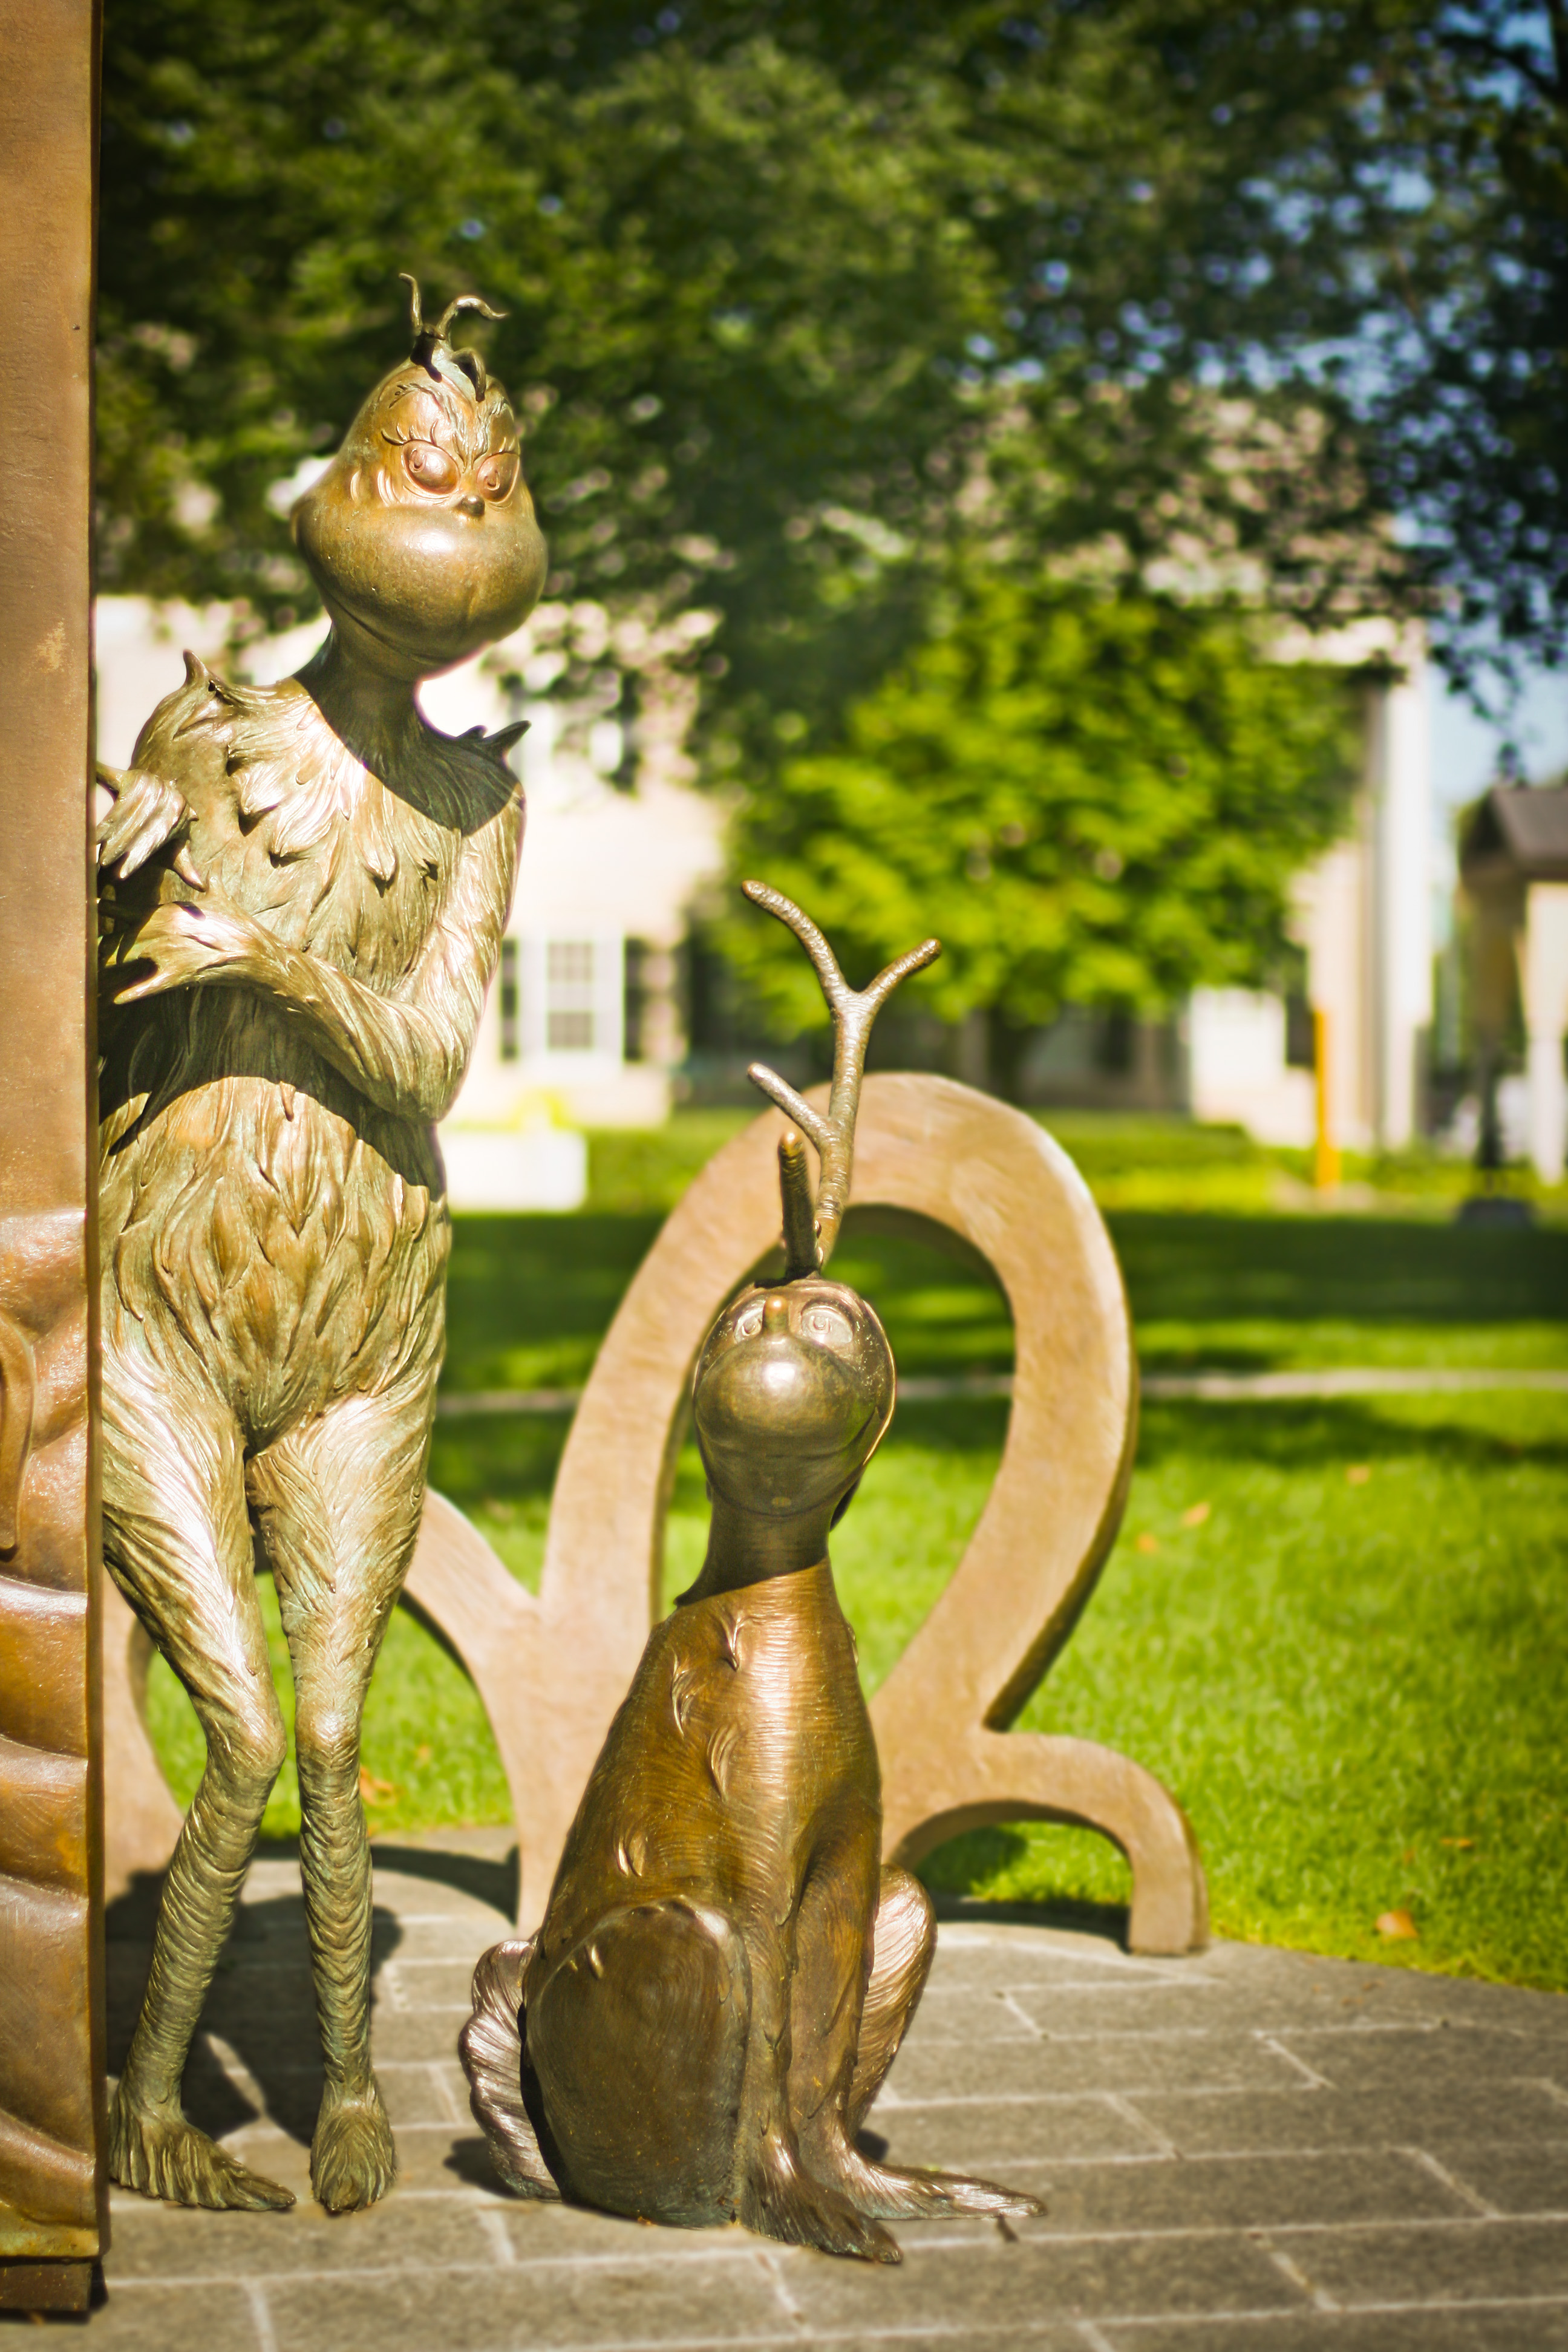 Bronze sculptures of the Dr. Seuss Characters Grinch and Max from the book "How the Grinch Stole Christmas".